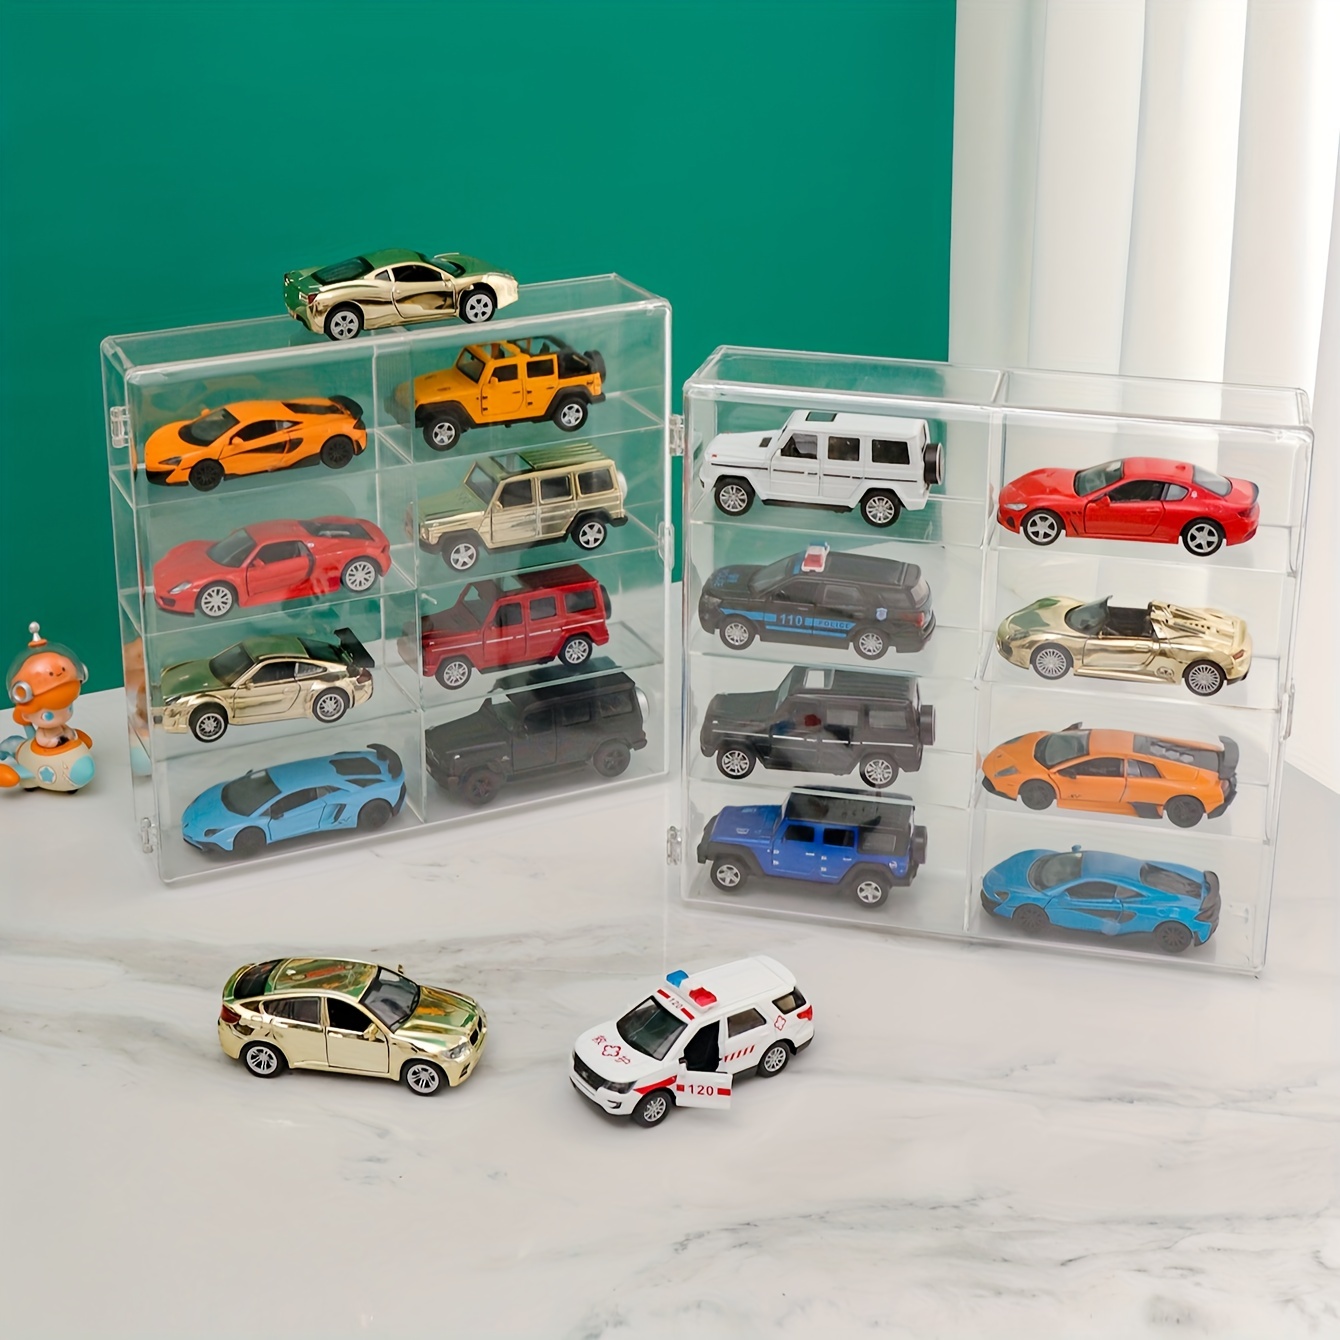 Carrying Storage Case for Hot Wheels 20 Cars Gift Pack, Organizer Display  Box for Hotwheels Toy Car/ Matchbox Cars Container